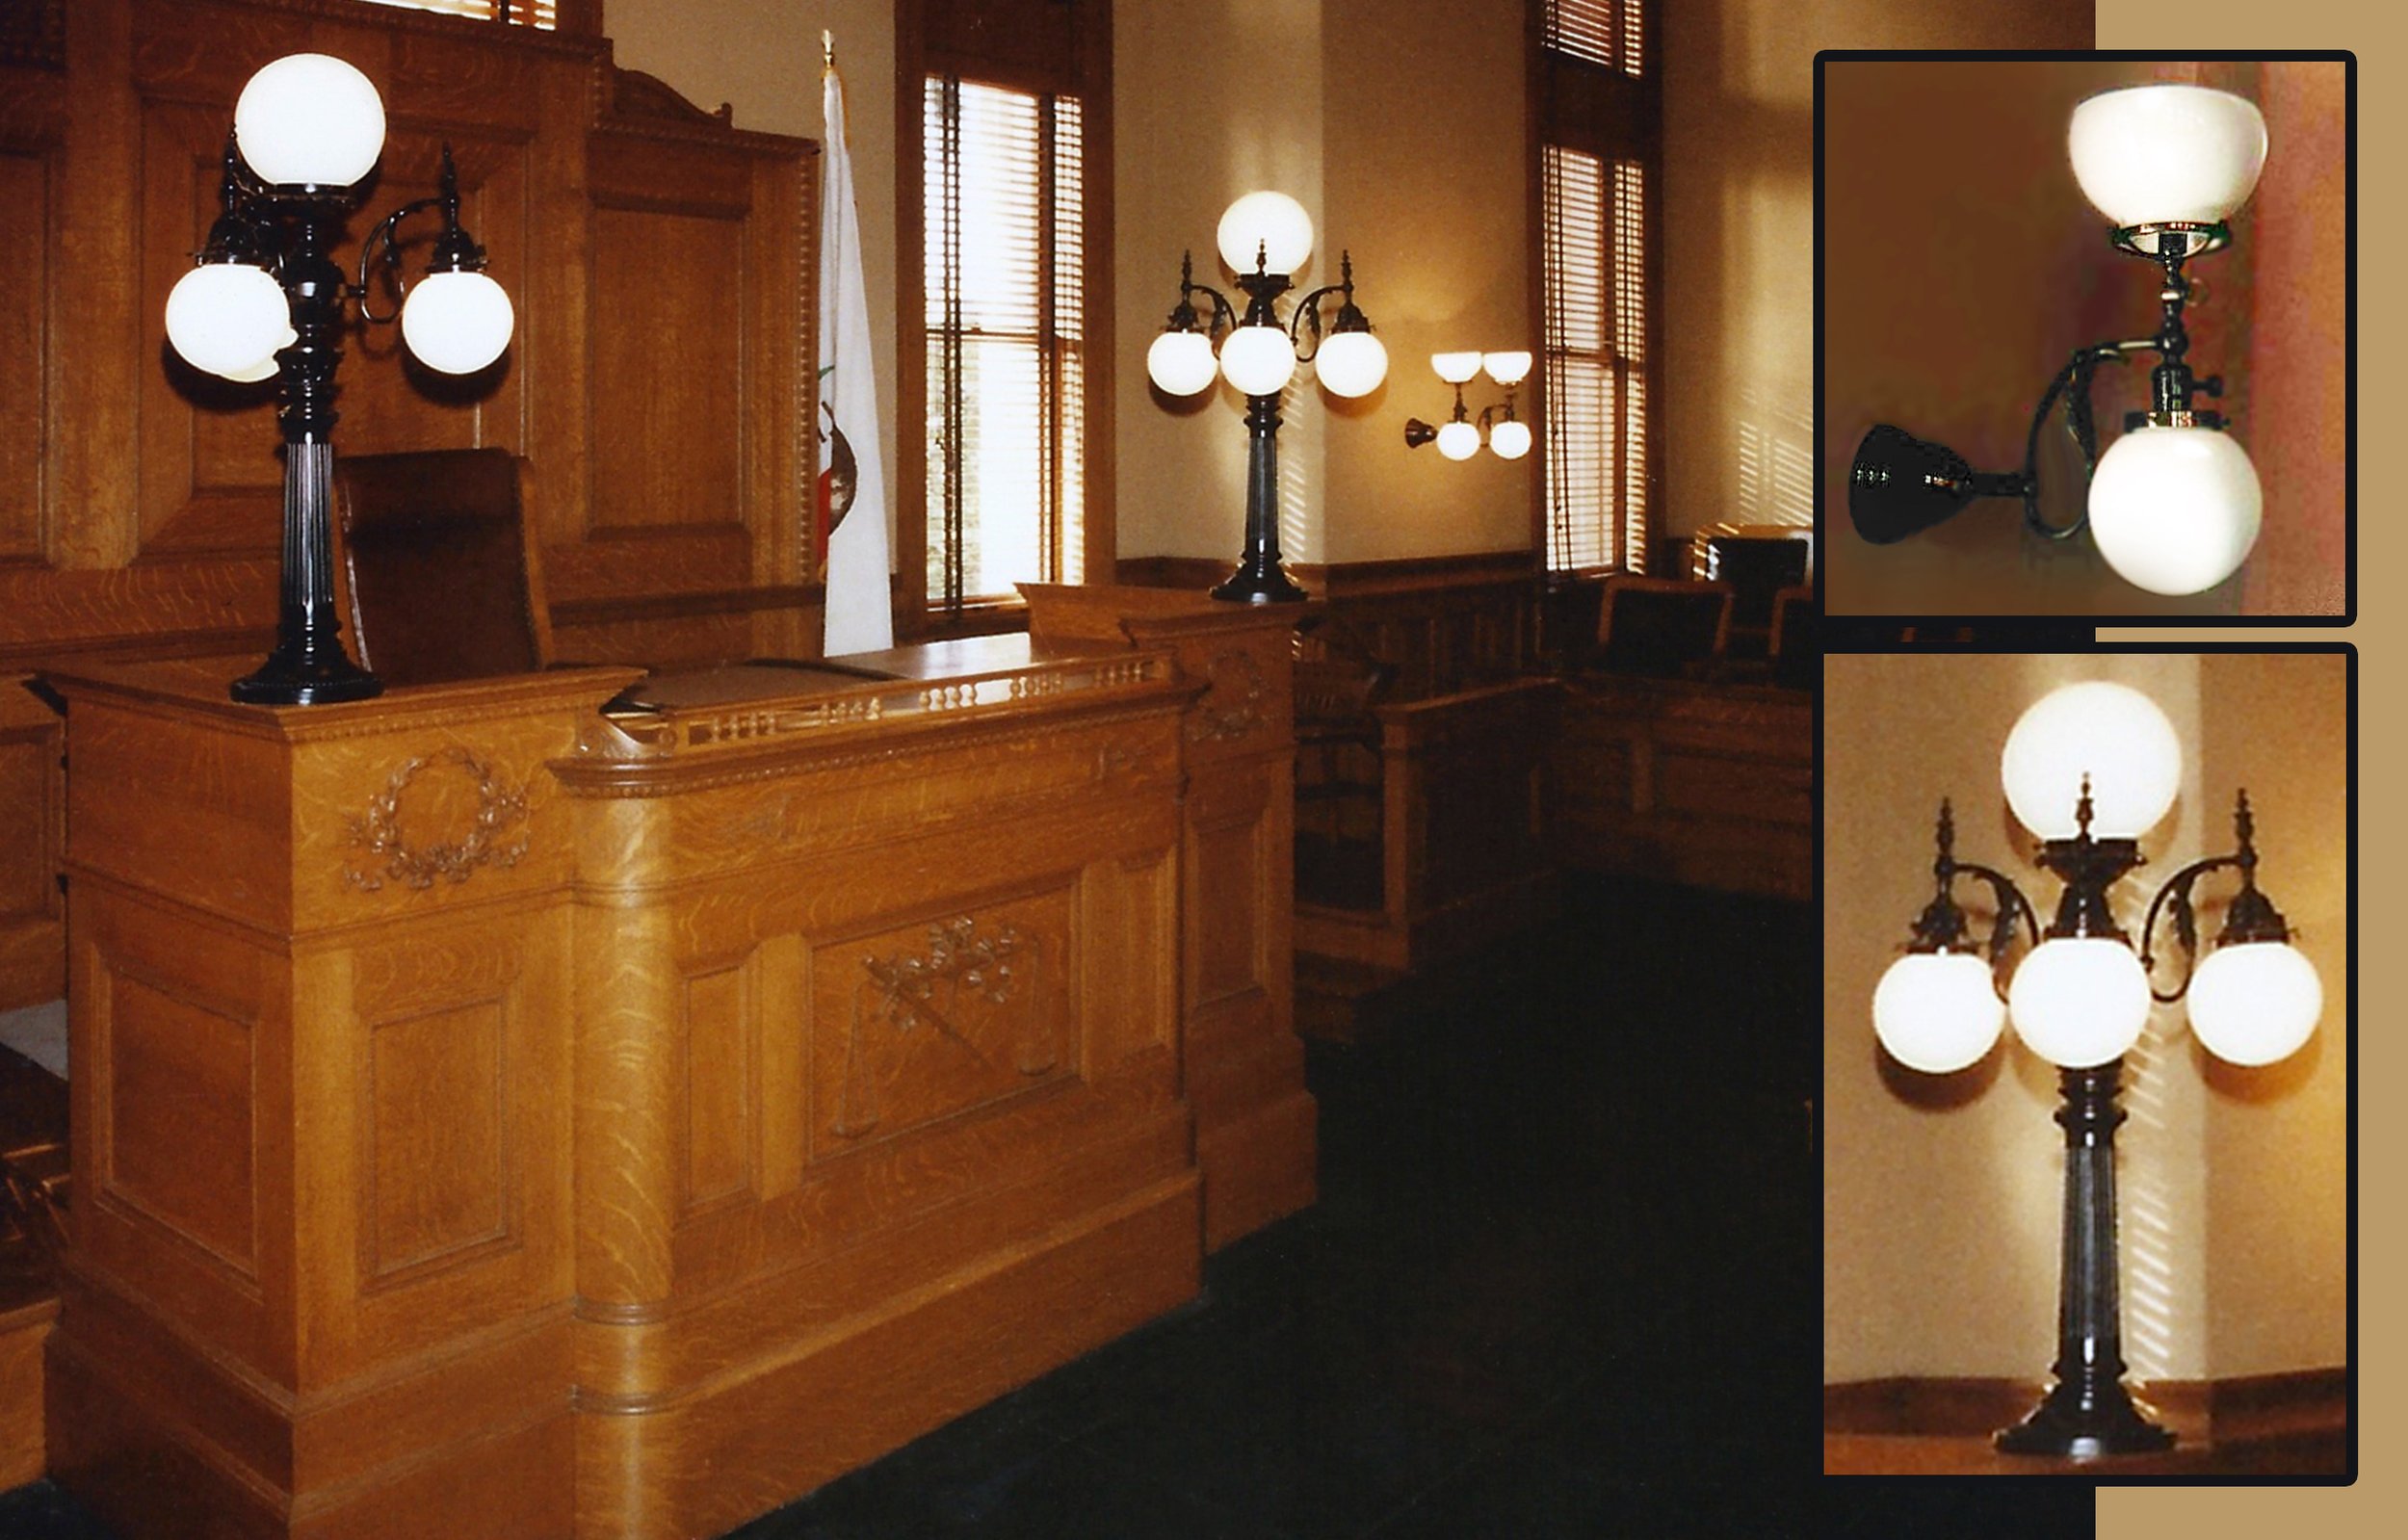 Old Orange County Courthouse - replicate